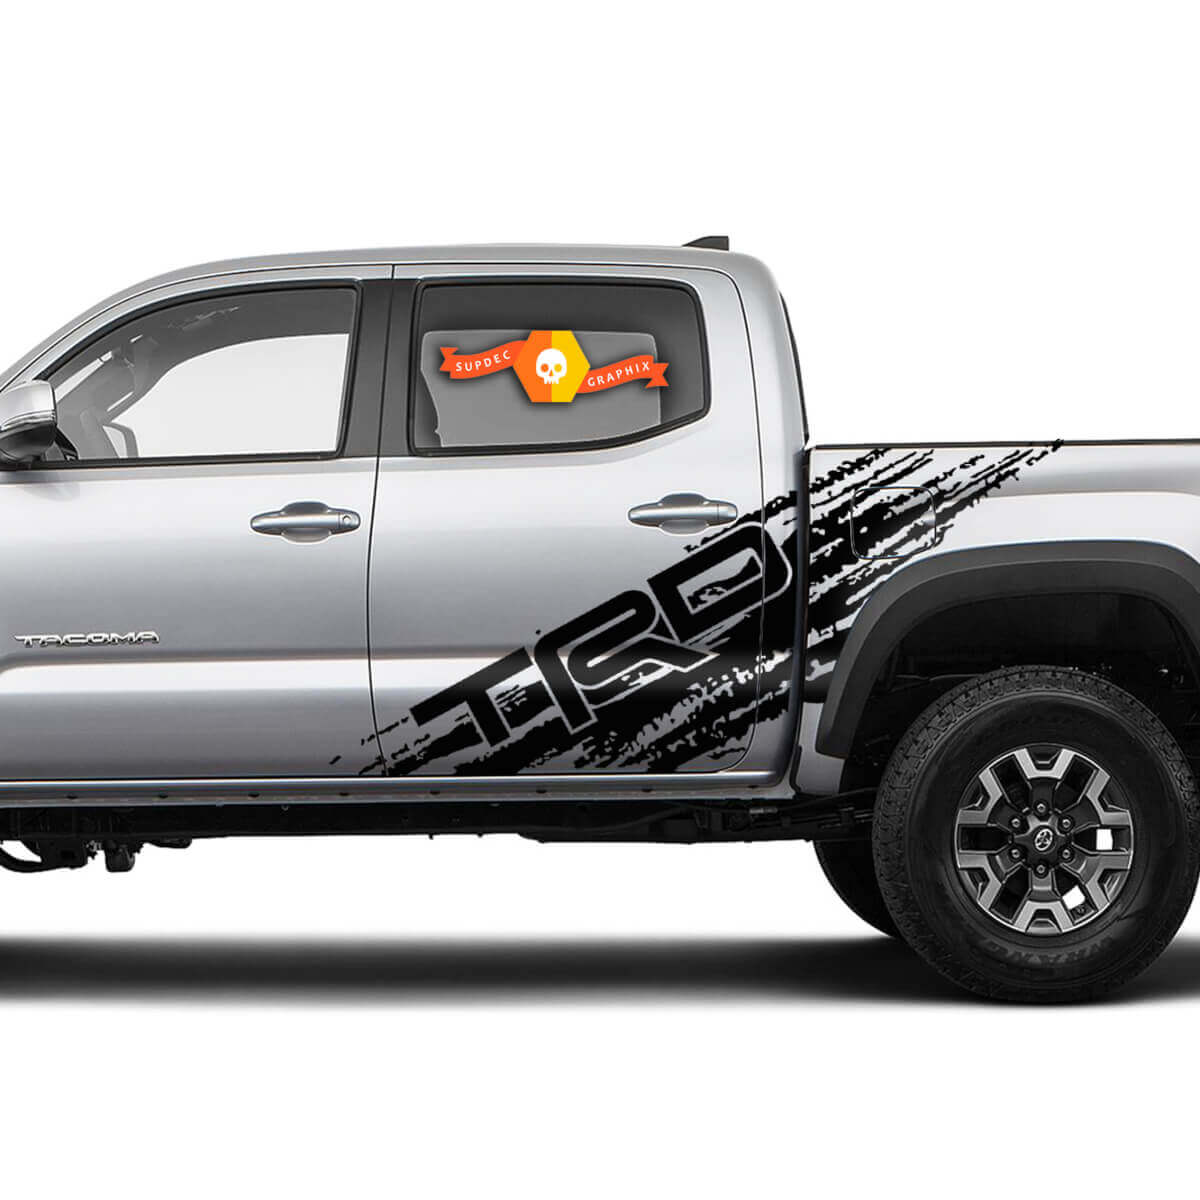 2 Tacoma Side Bed Doors TRD Splatter Vinyl Stickers Decal Kits for Toyota Tacoma
